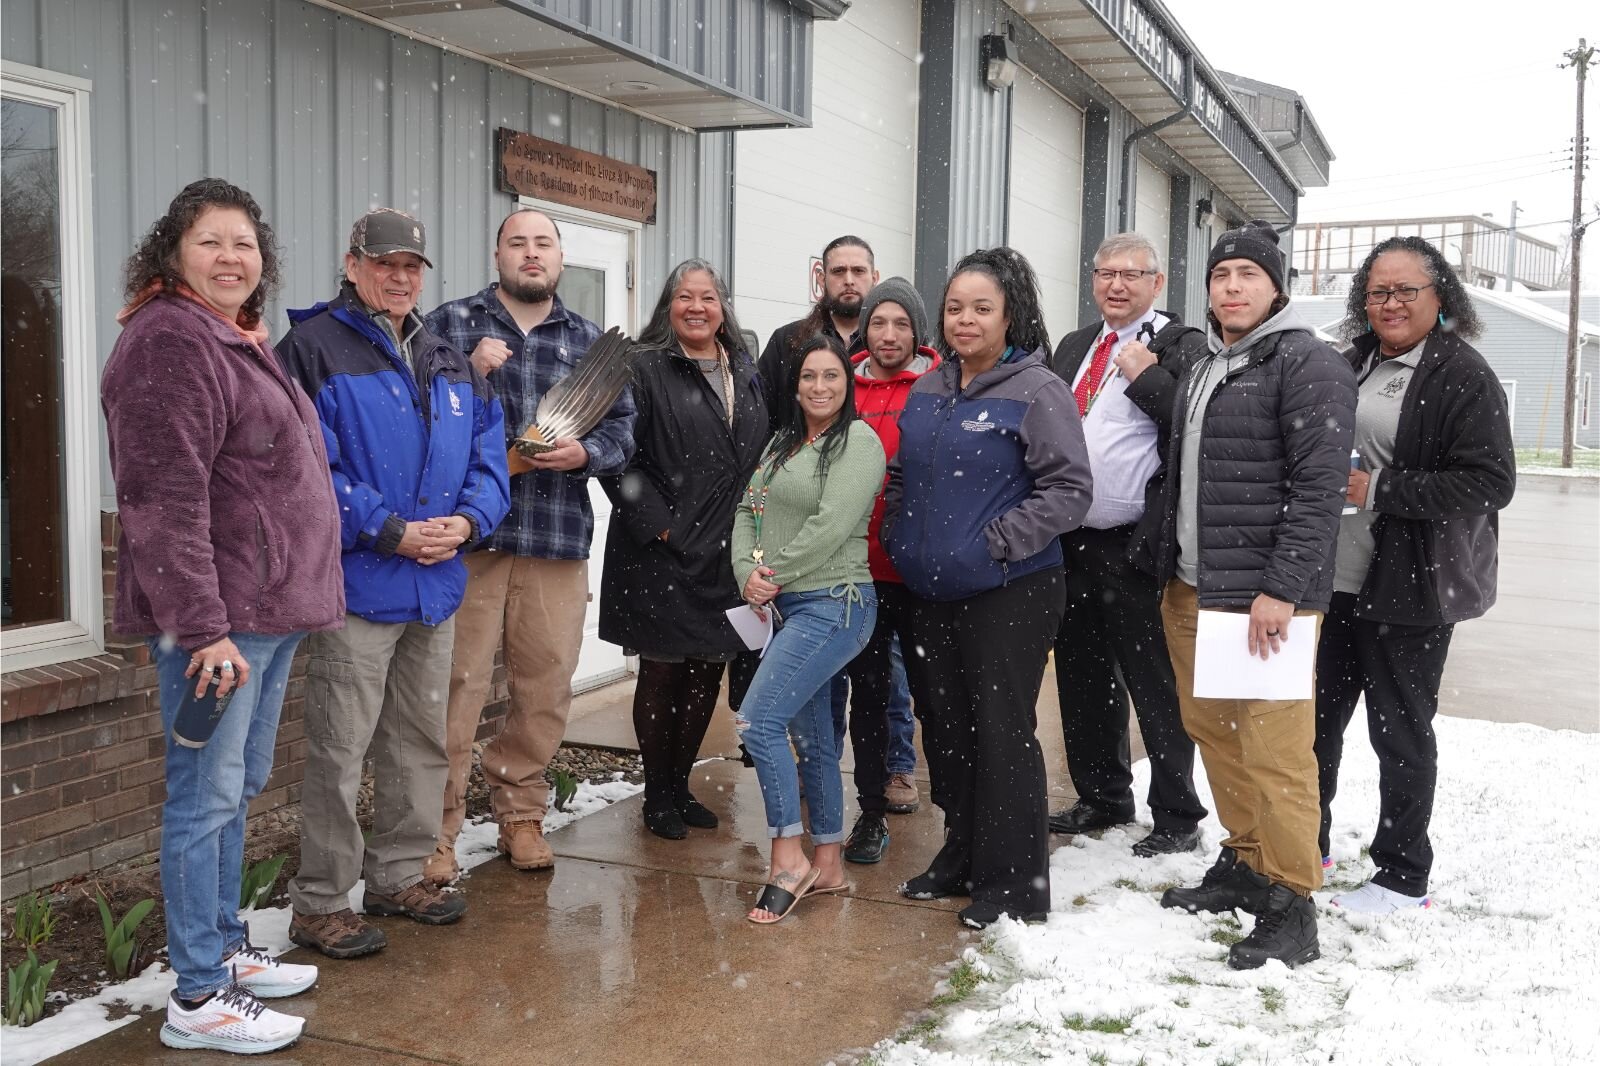  From left, NHBP Tribal Members who attended the Athens Township Board meeting. A full list of those pictured can be found below.